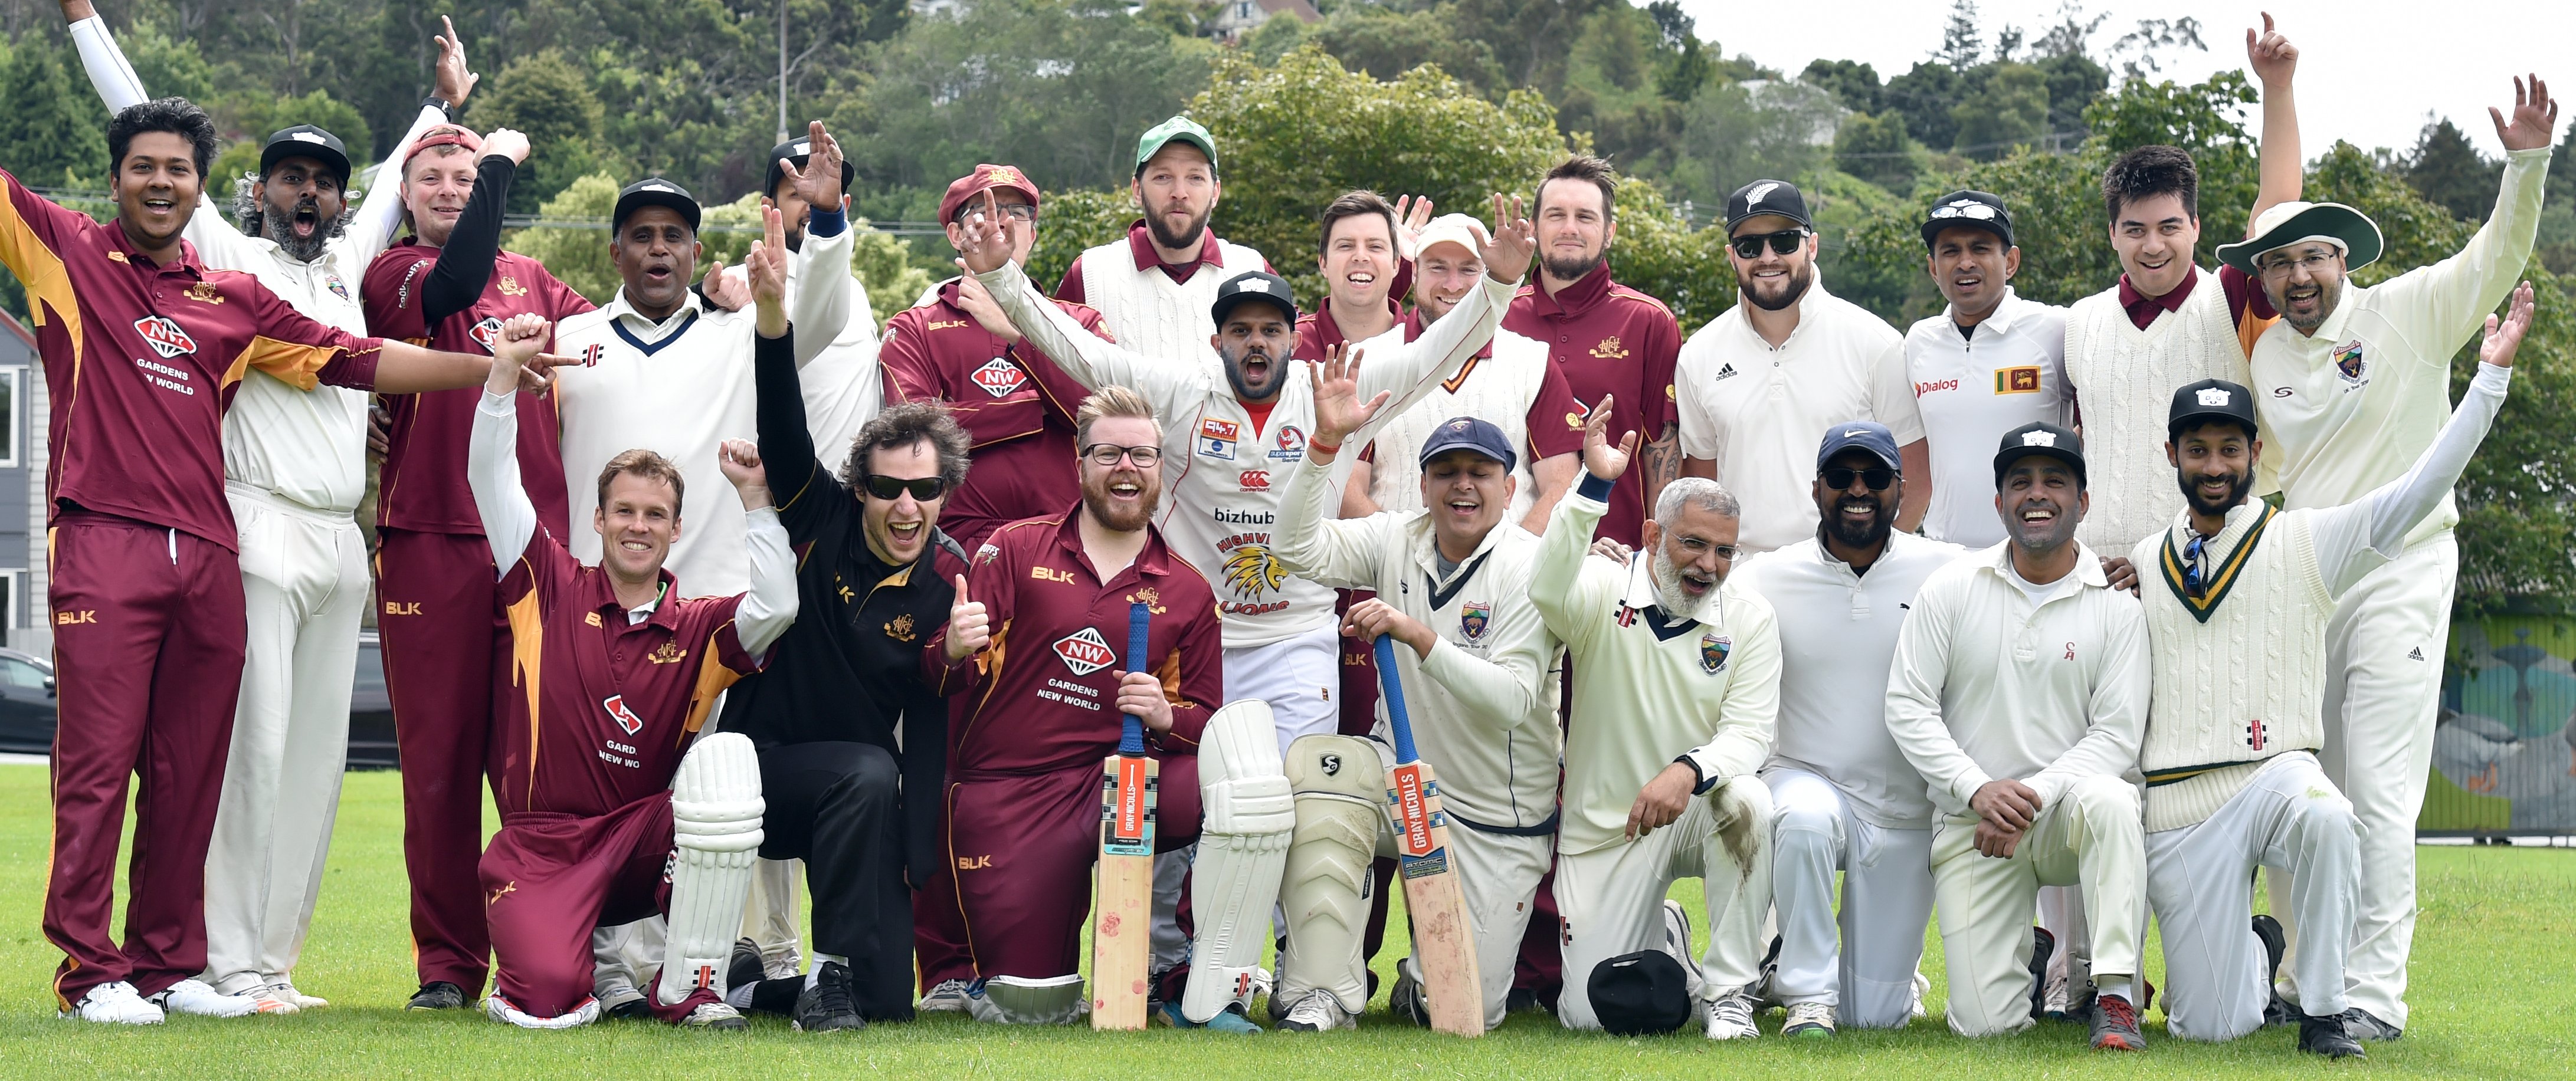 Posing together are members of the Bay Area Beevers and North East Valley cricket teams. PHOTOS:...